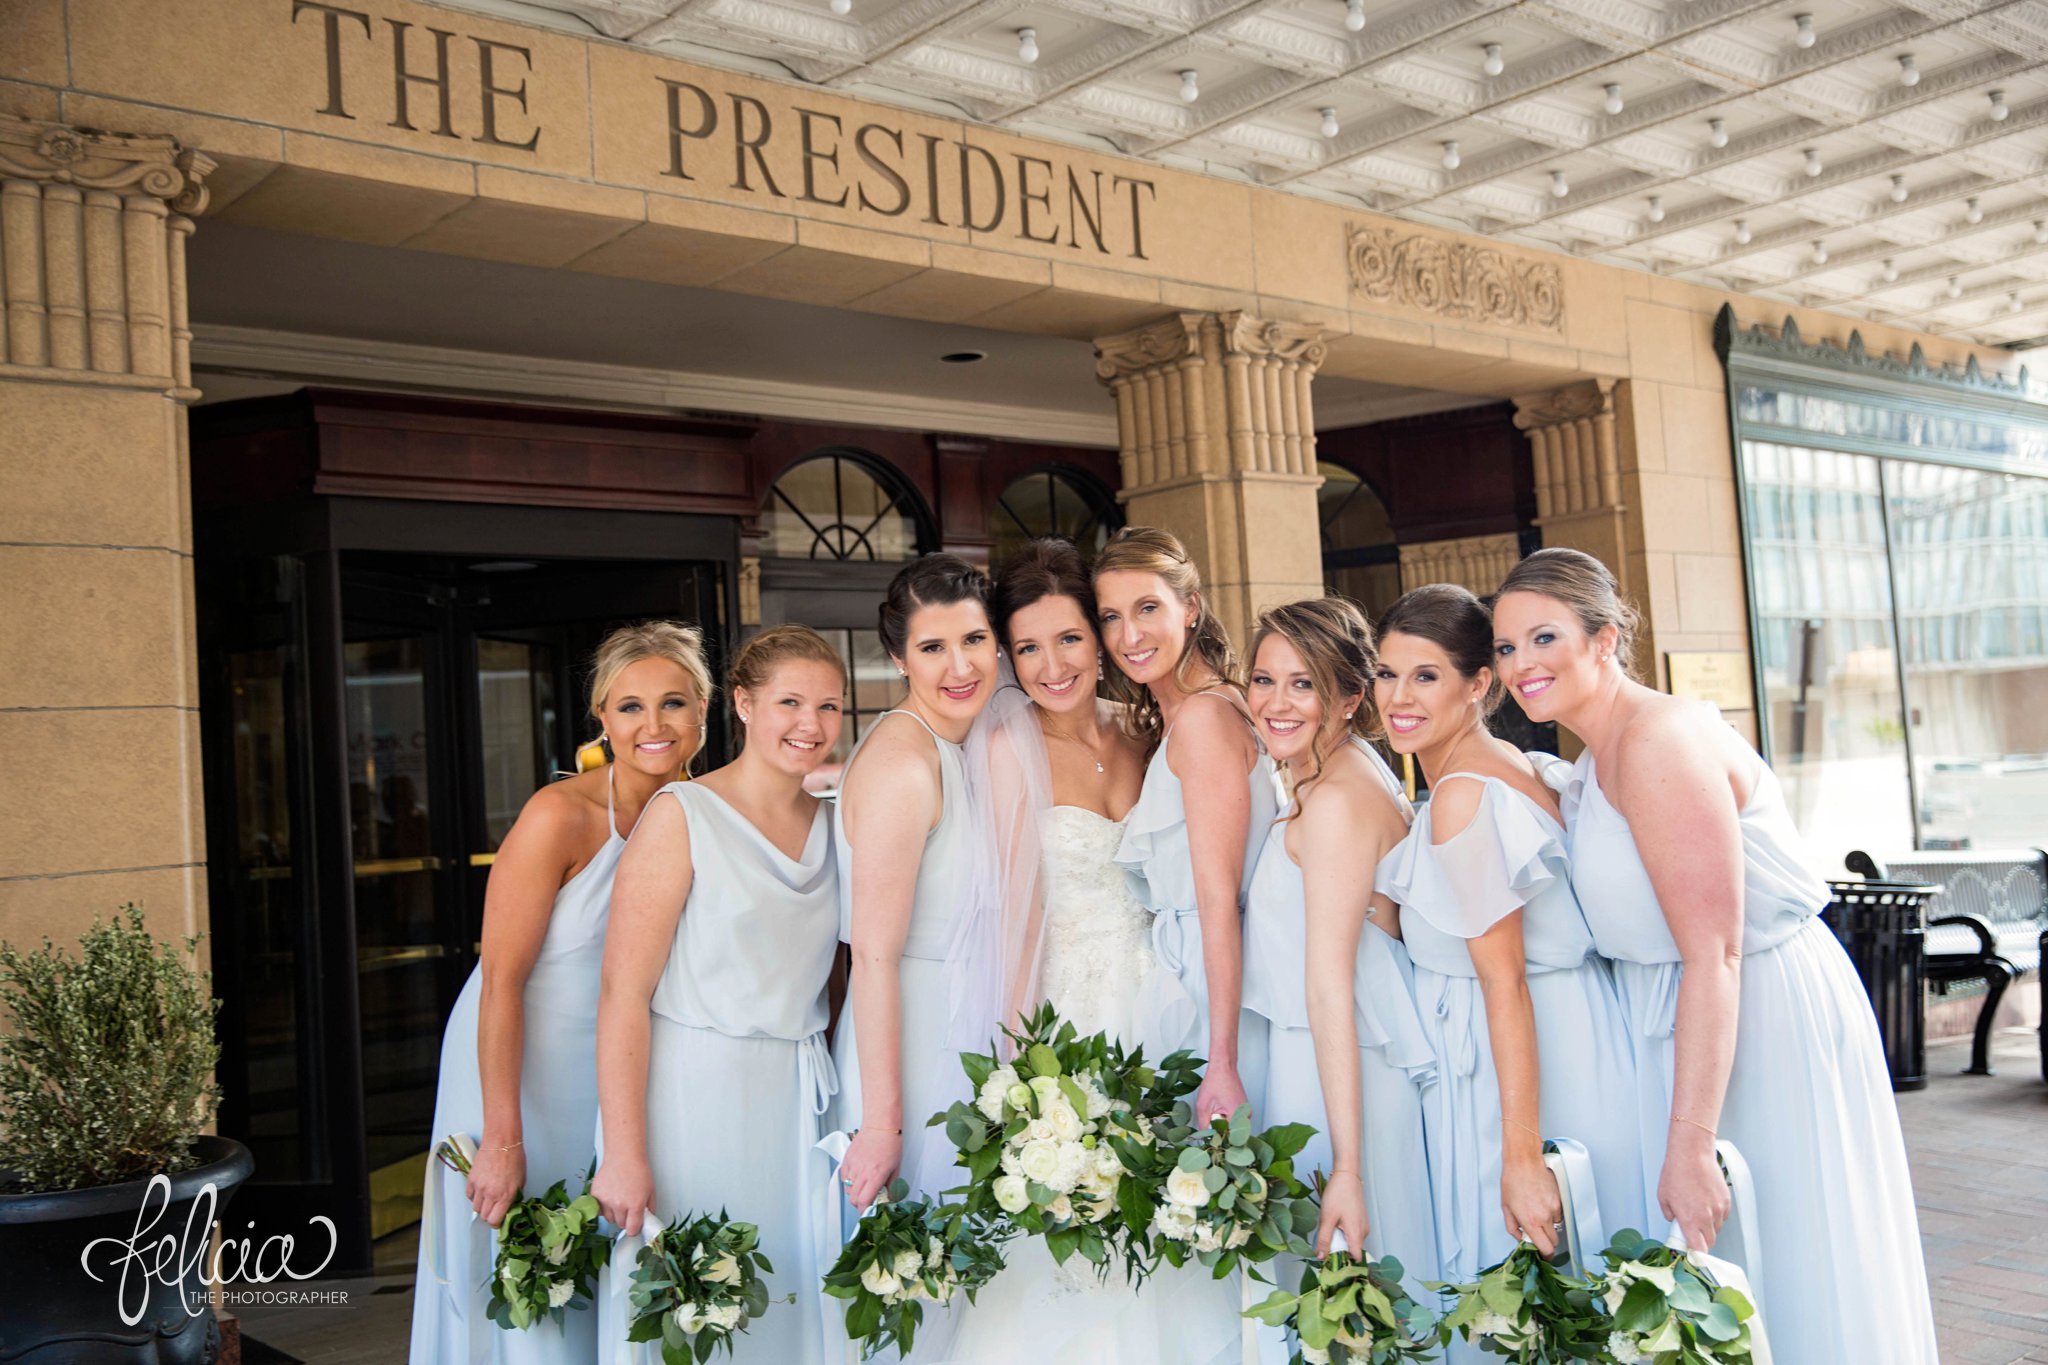 Grace and Holy Trinity Cathedral Wedding Photos | Kansas City | Bridal Party at The President Hotel | Images by www.feliciathephotographer.com